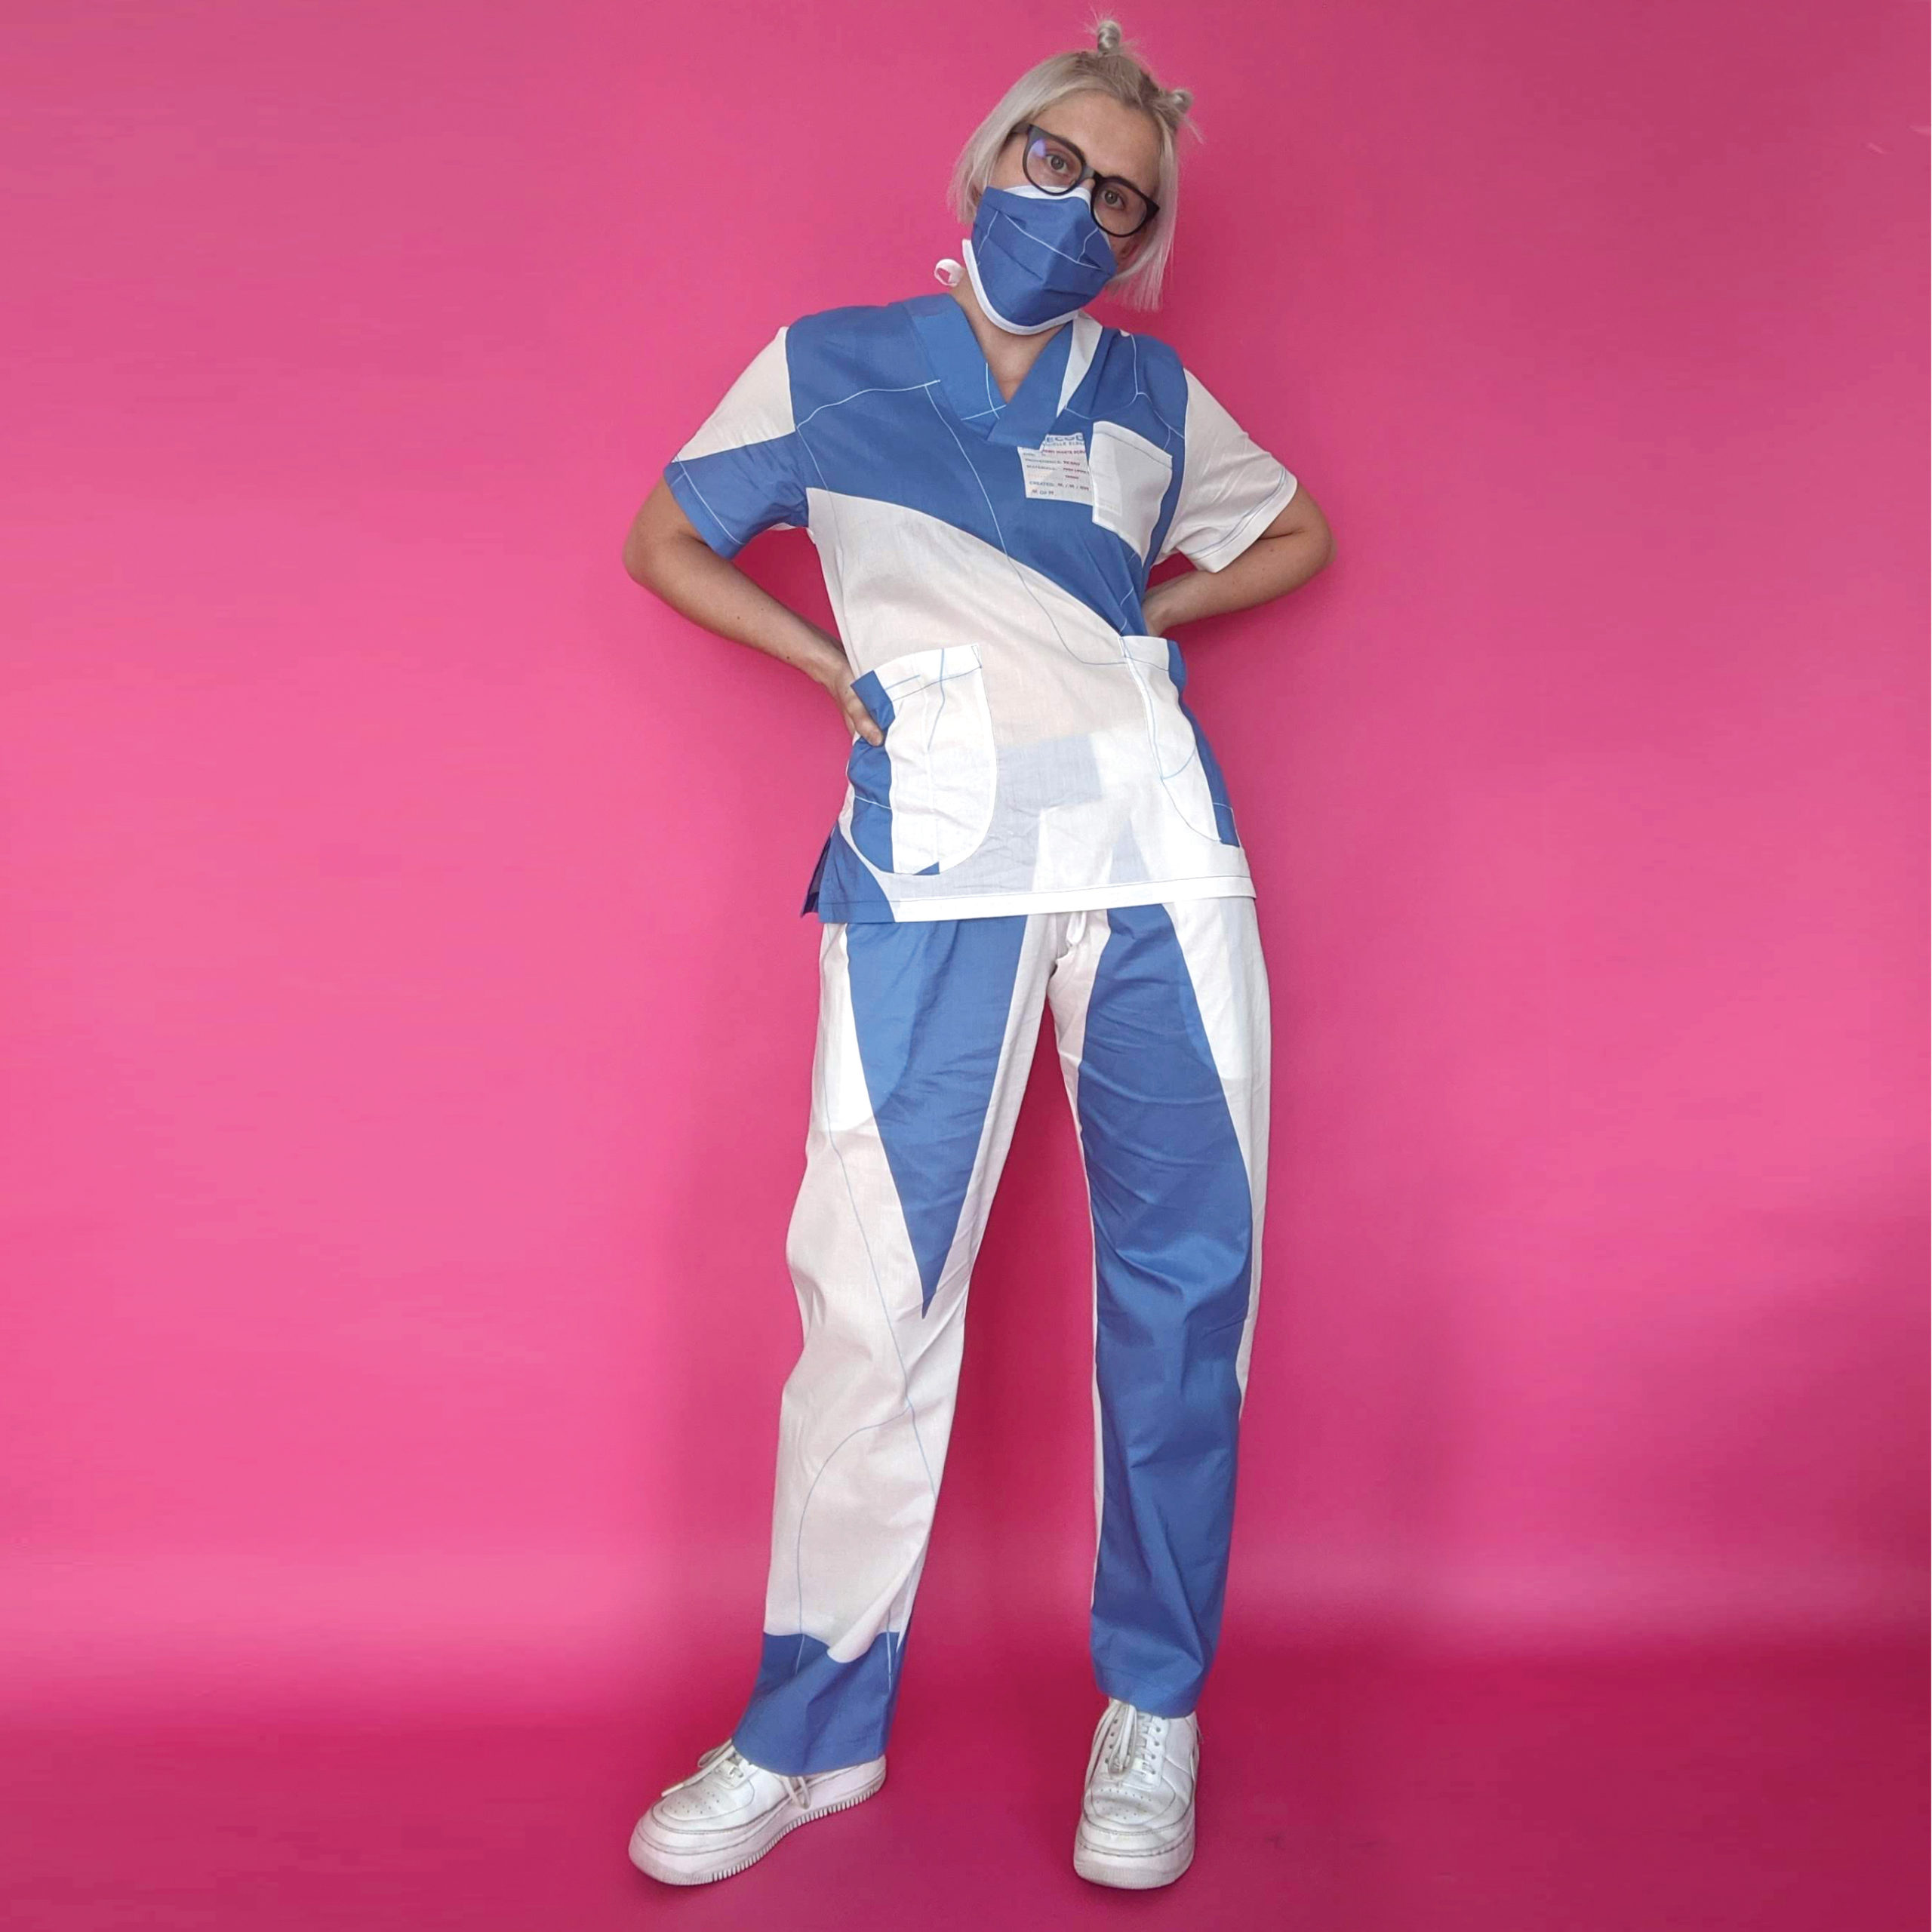 Photo of a light-skinned woman wearing a blue and white scrub set and white sneakers.